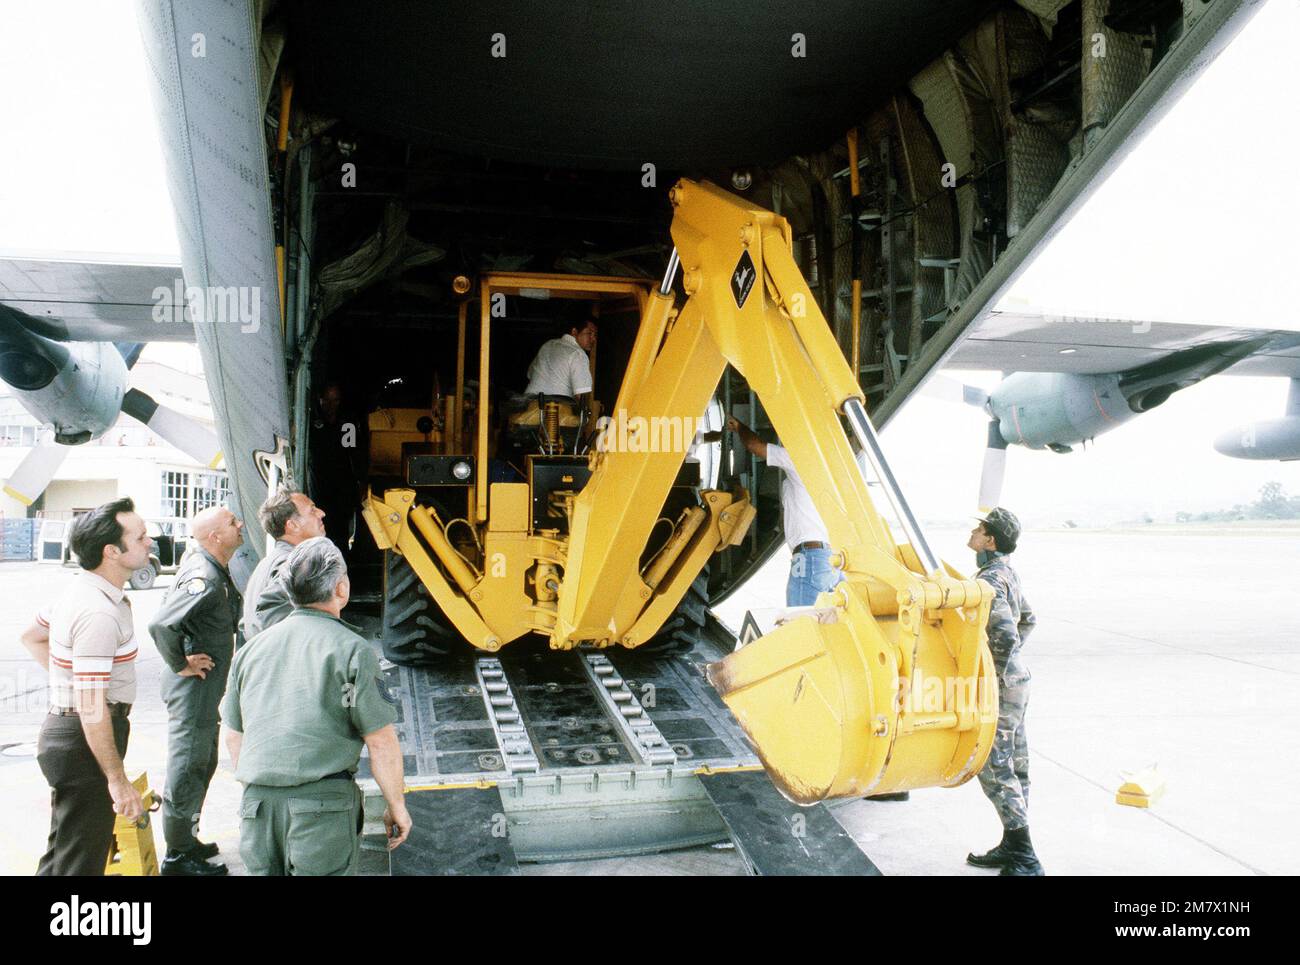 Members of the 1300th Military Airlift Squadron airlift control element (ALCE) load a backhoe digger aboard a C-130 Hercules aircraft during Exercise Desplazameinto Combinado. Subject Operation/Series: DESPLAZAMEINTO COMBINADO Base: Comayagua Country: Honduras (HND) Stock Photo